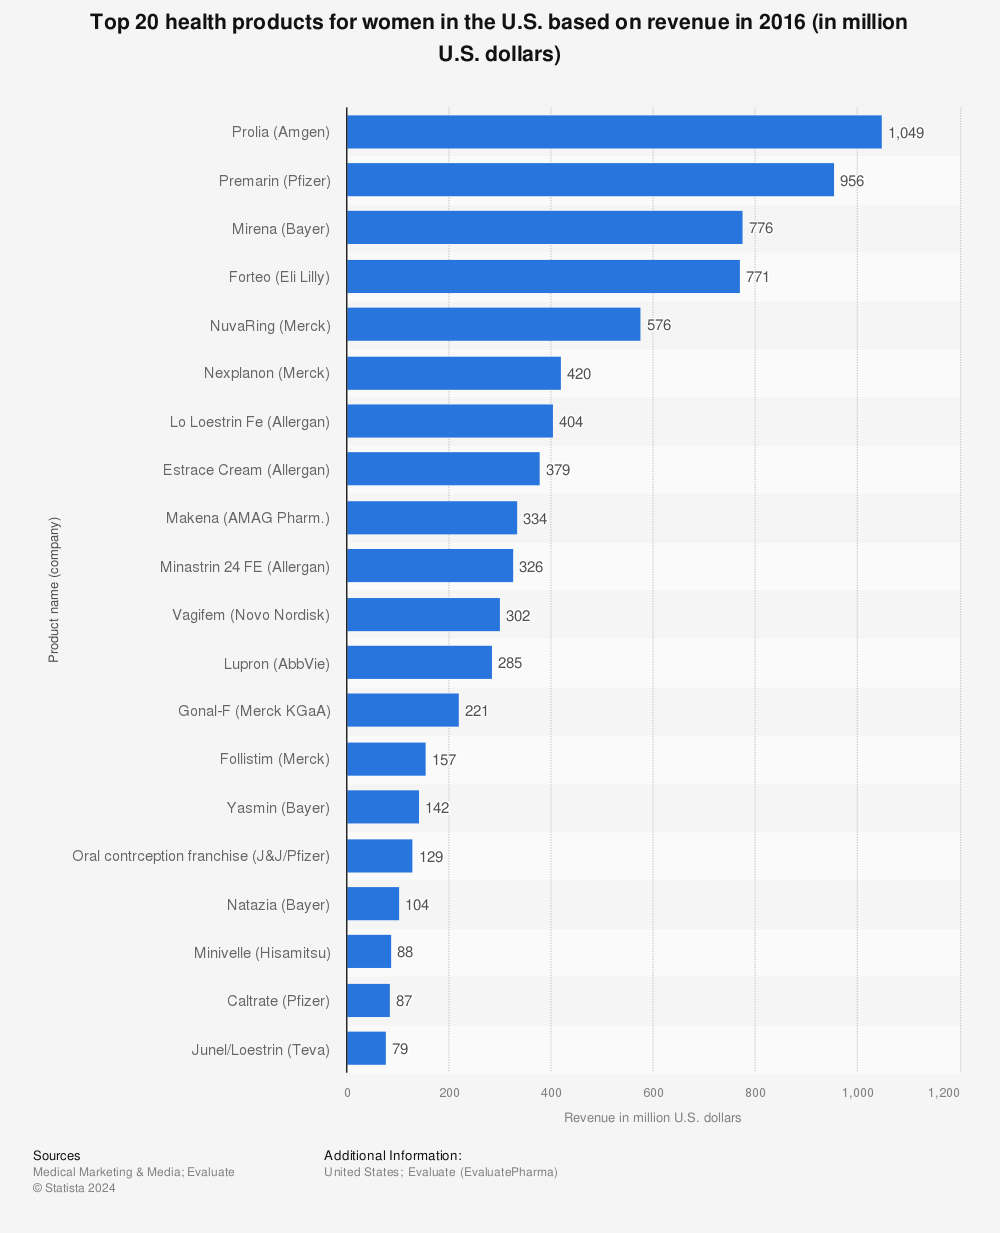 Statistic: Top 20 health products for women in the U.S. based on revenue in 2016 (in million U.S. dollars) | Statista